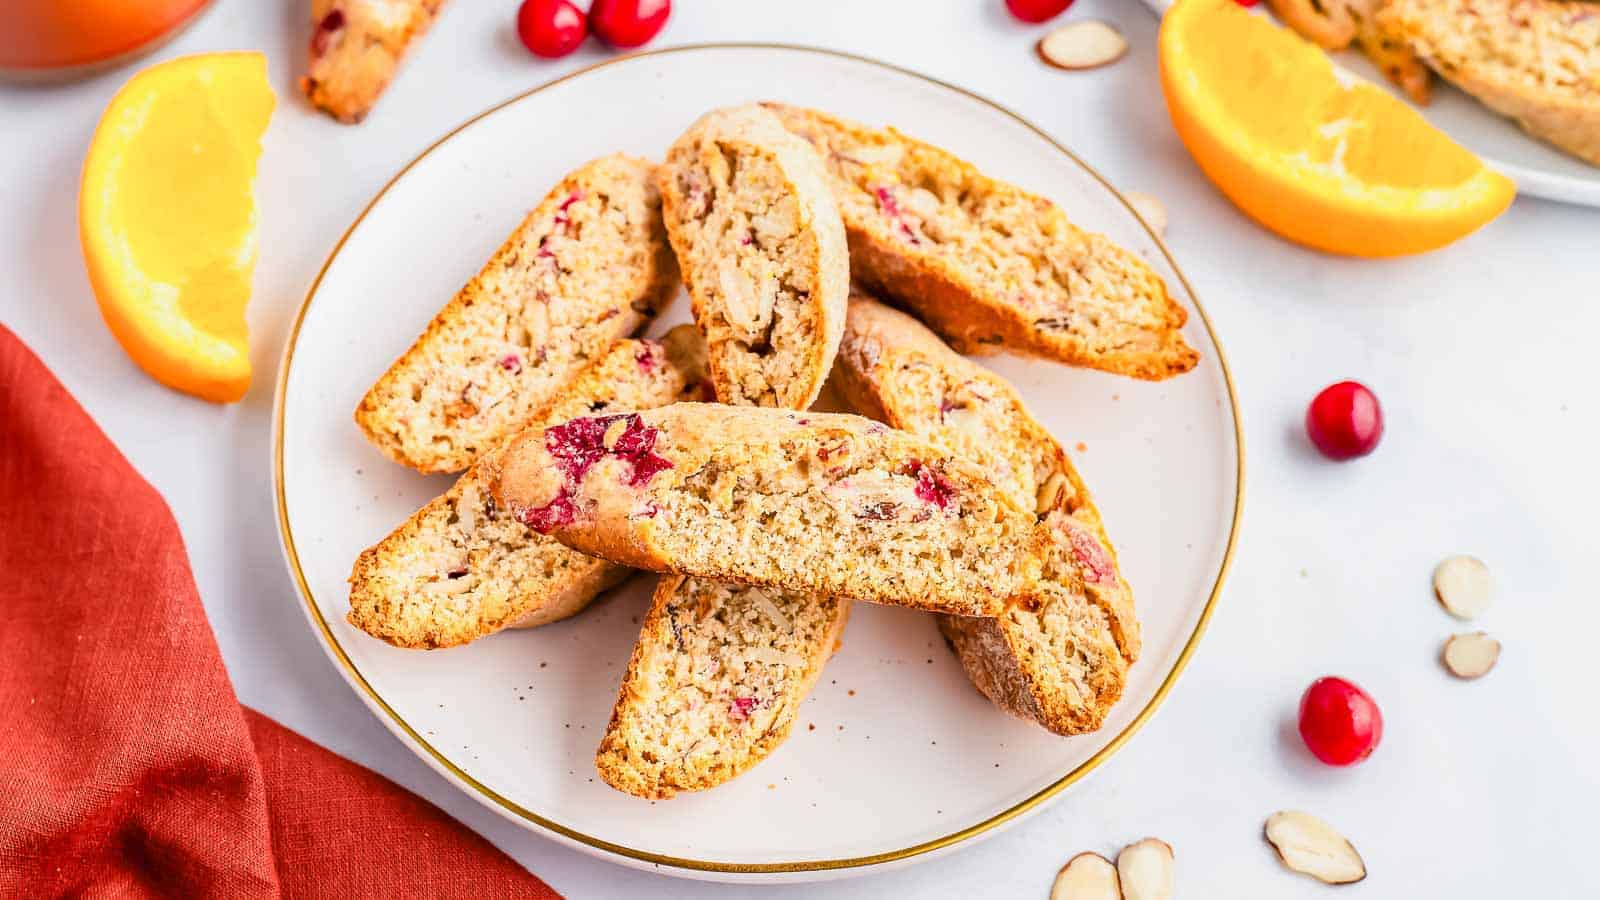 Cranberry biscotti on a plate with orange slices.